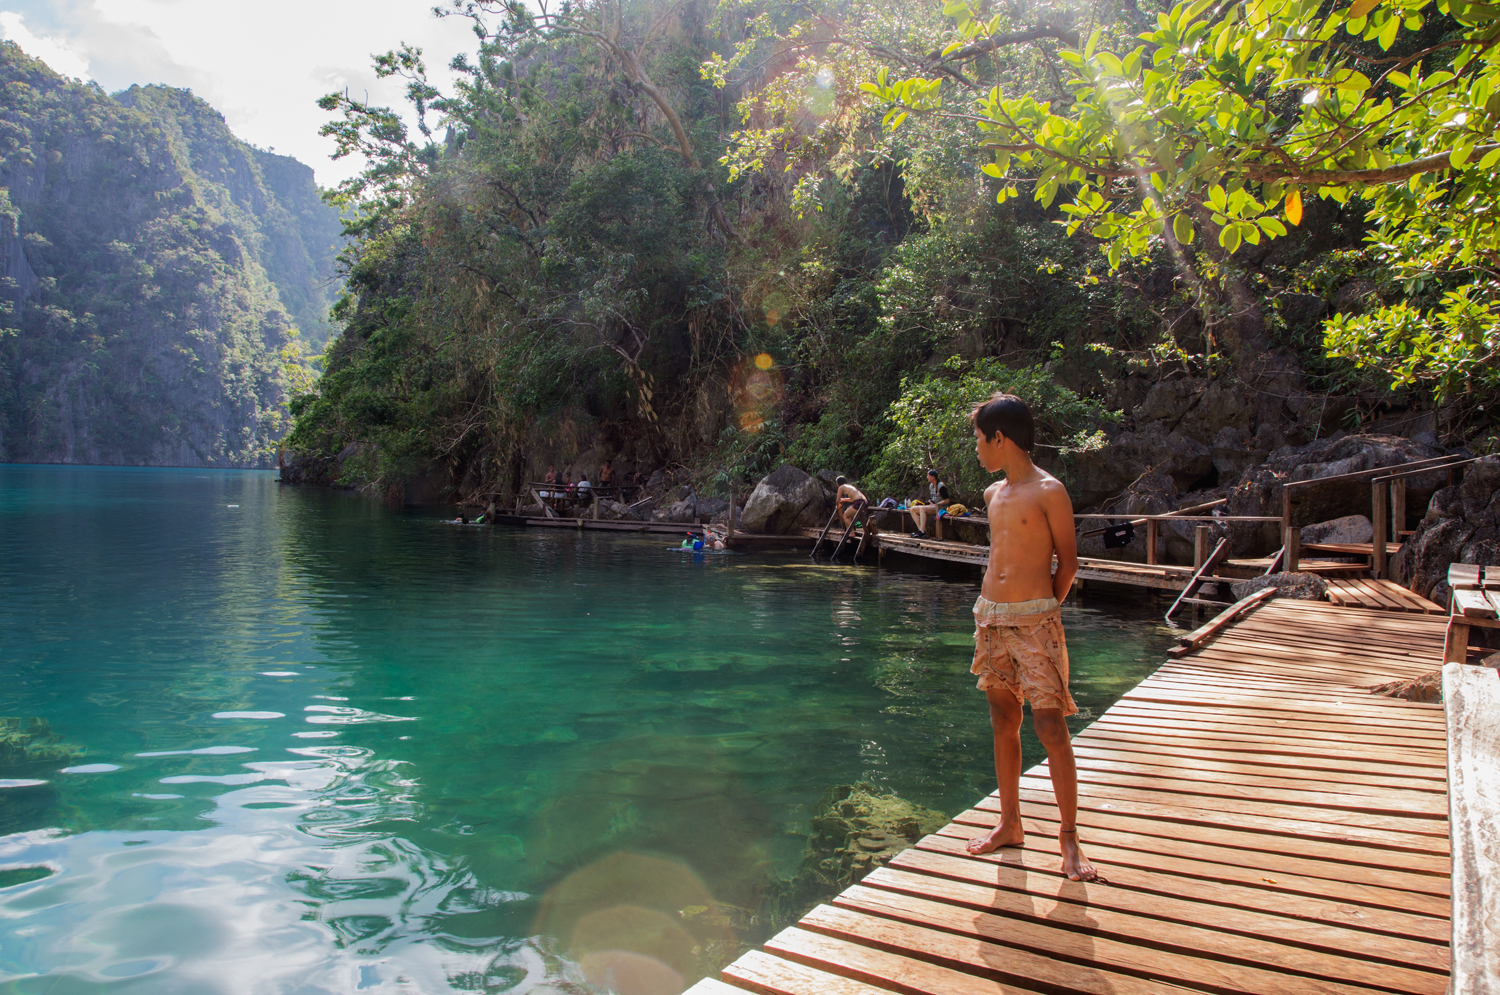  A young Tagnbanua boy looks out at Kayangan Lake on Coron Island, a popular tourist destination in Northern Palawan. The Tagbanua have ancestral domain rights on Coron and surrounding waters but they are at risk of development and pressure from the 